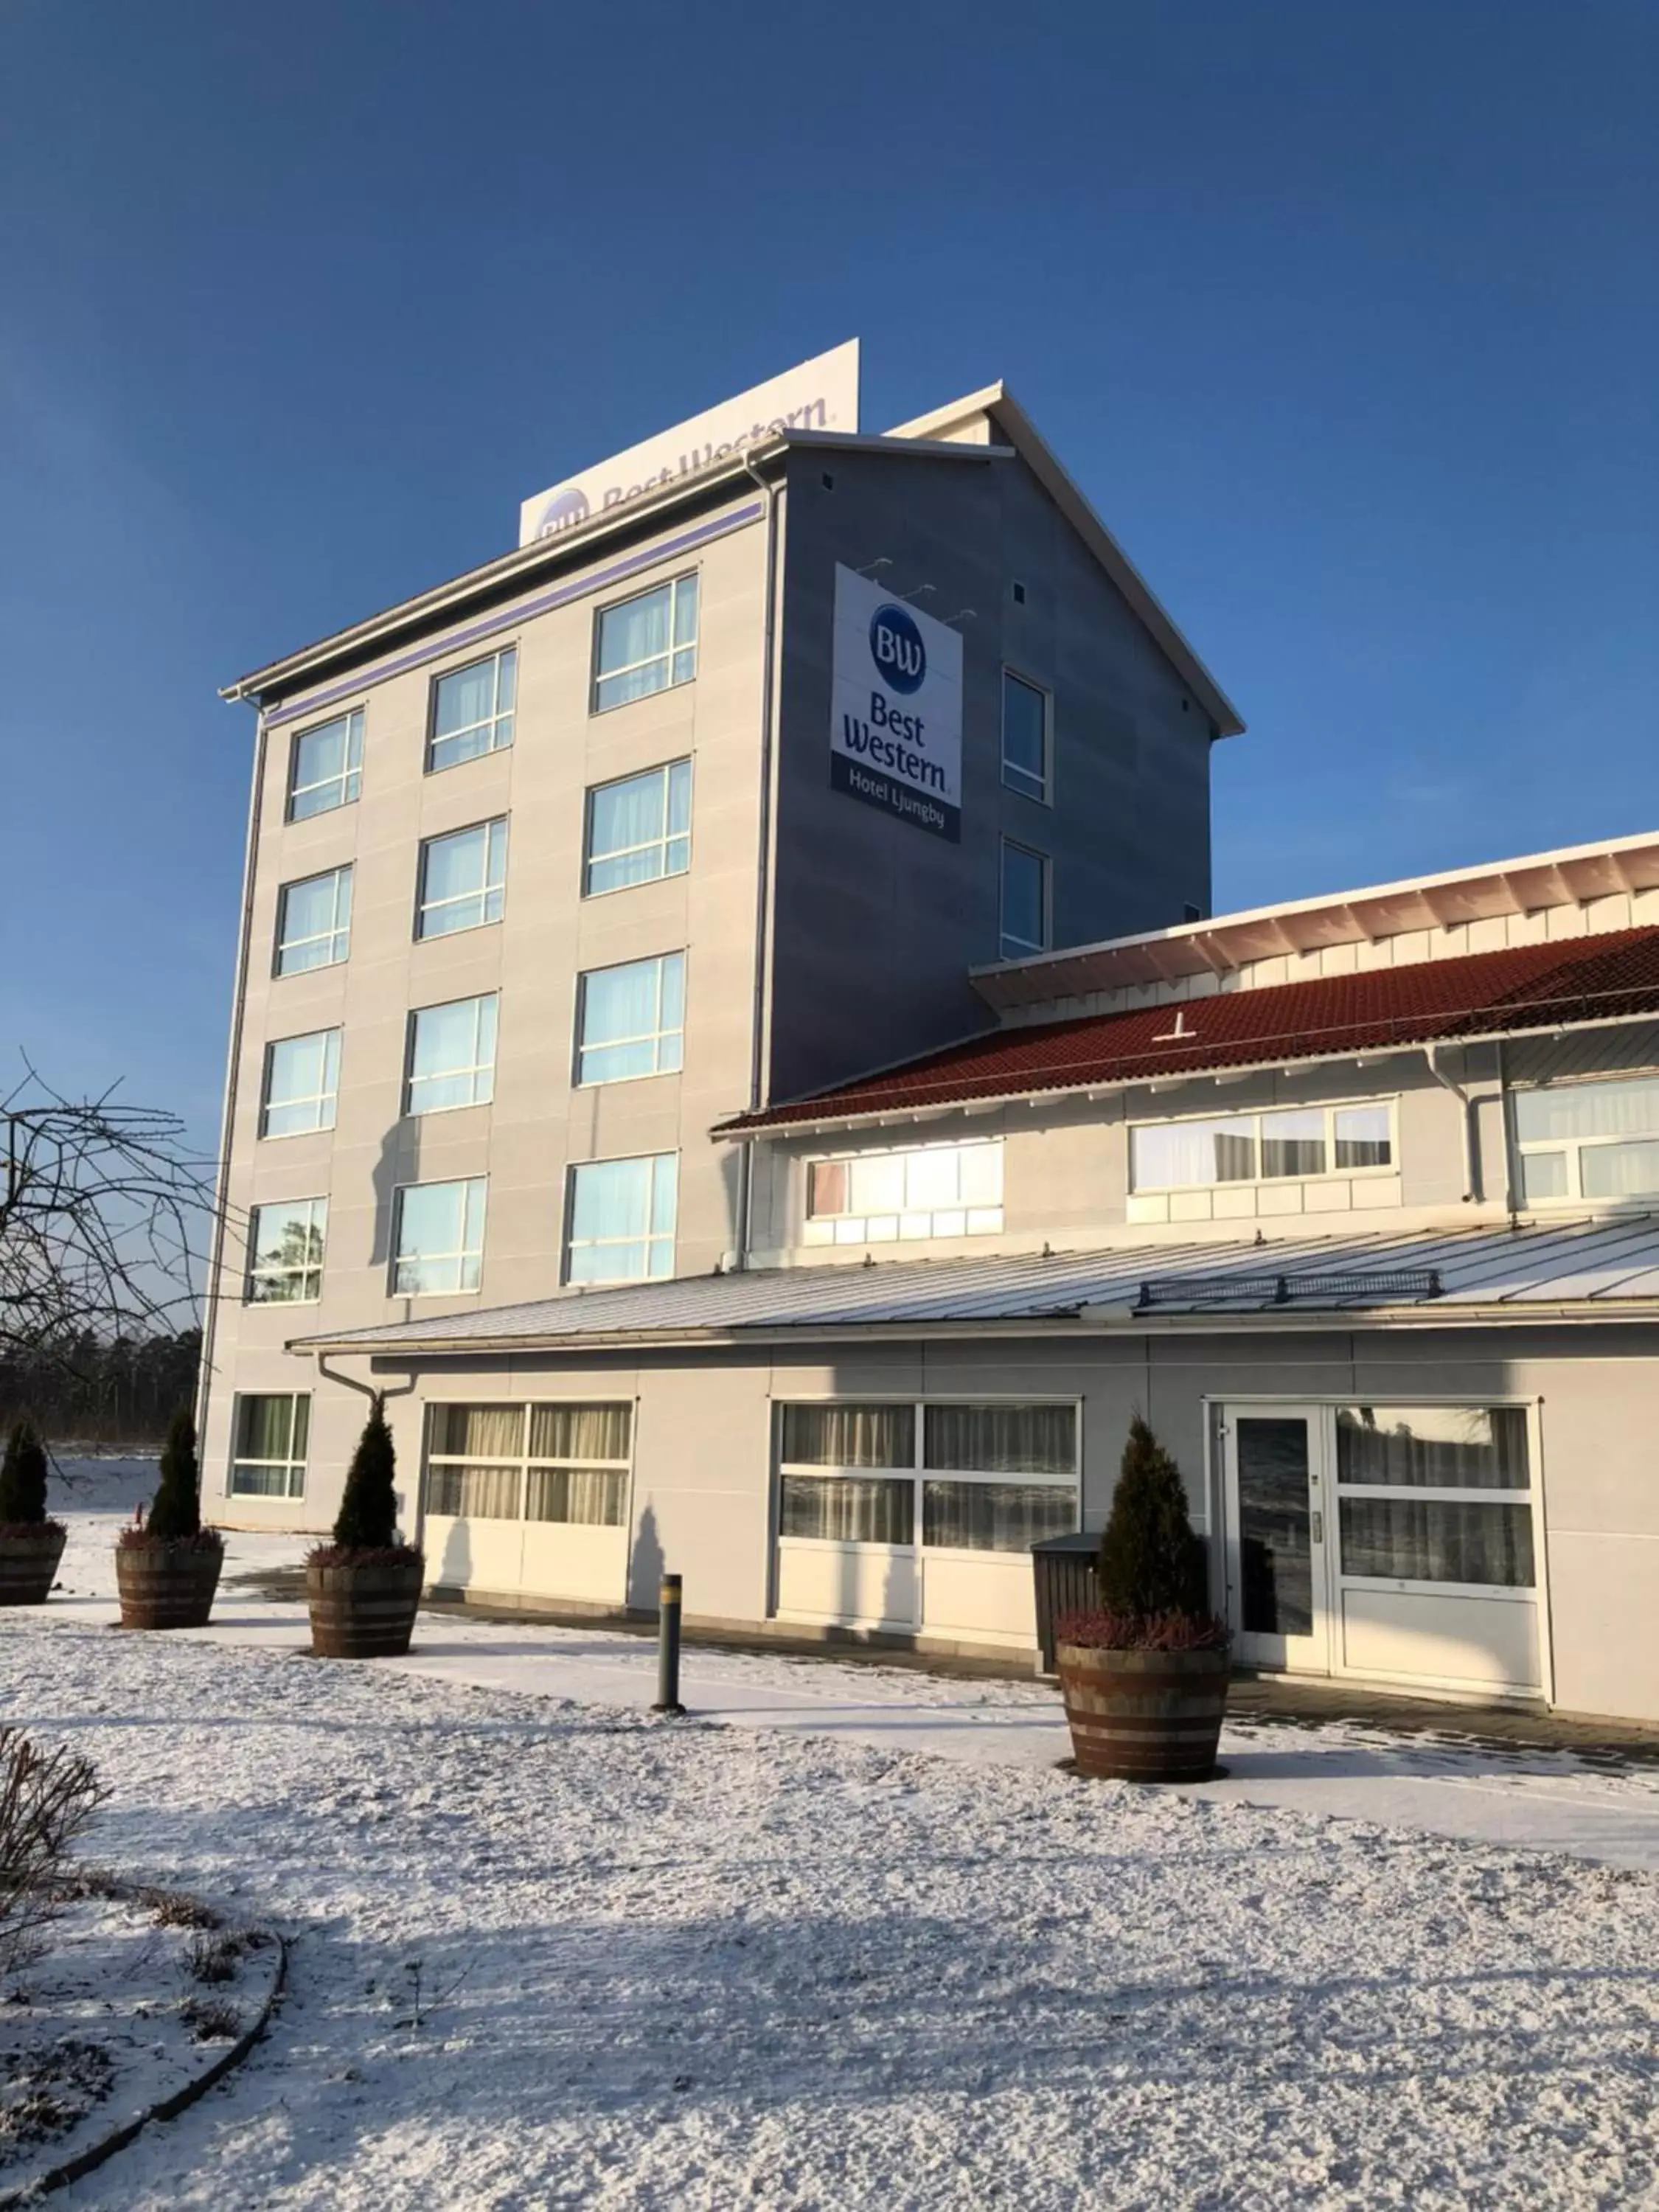 Property Building in Best Western Hotell Ljungby